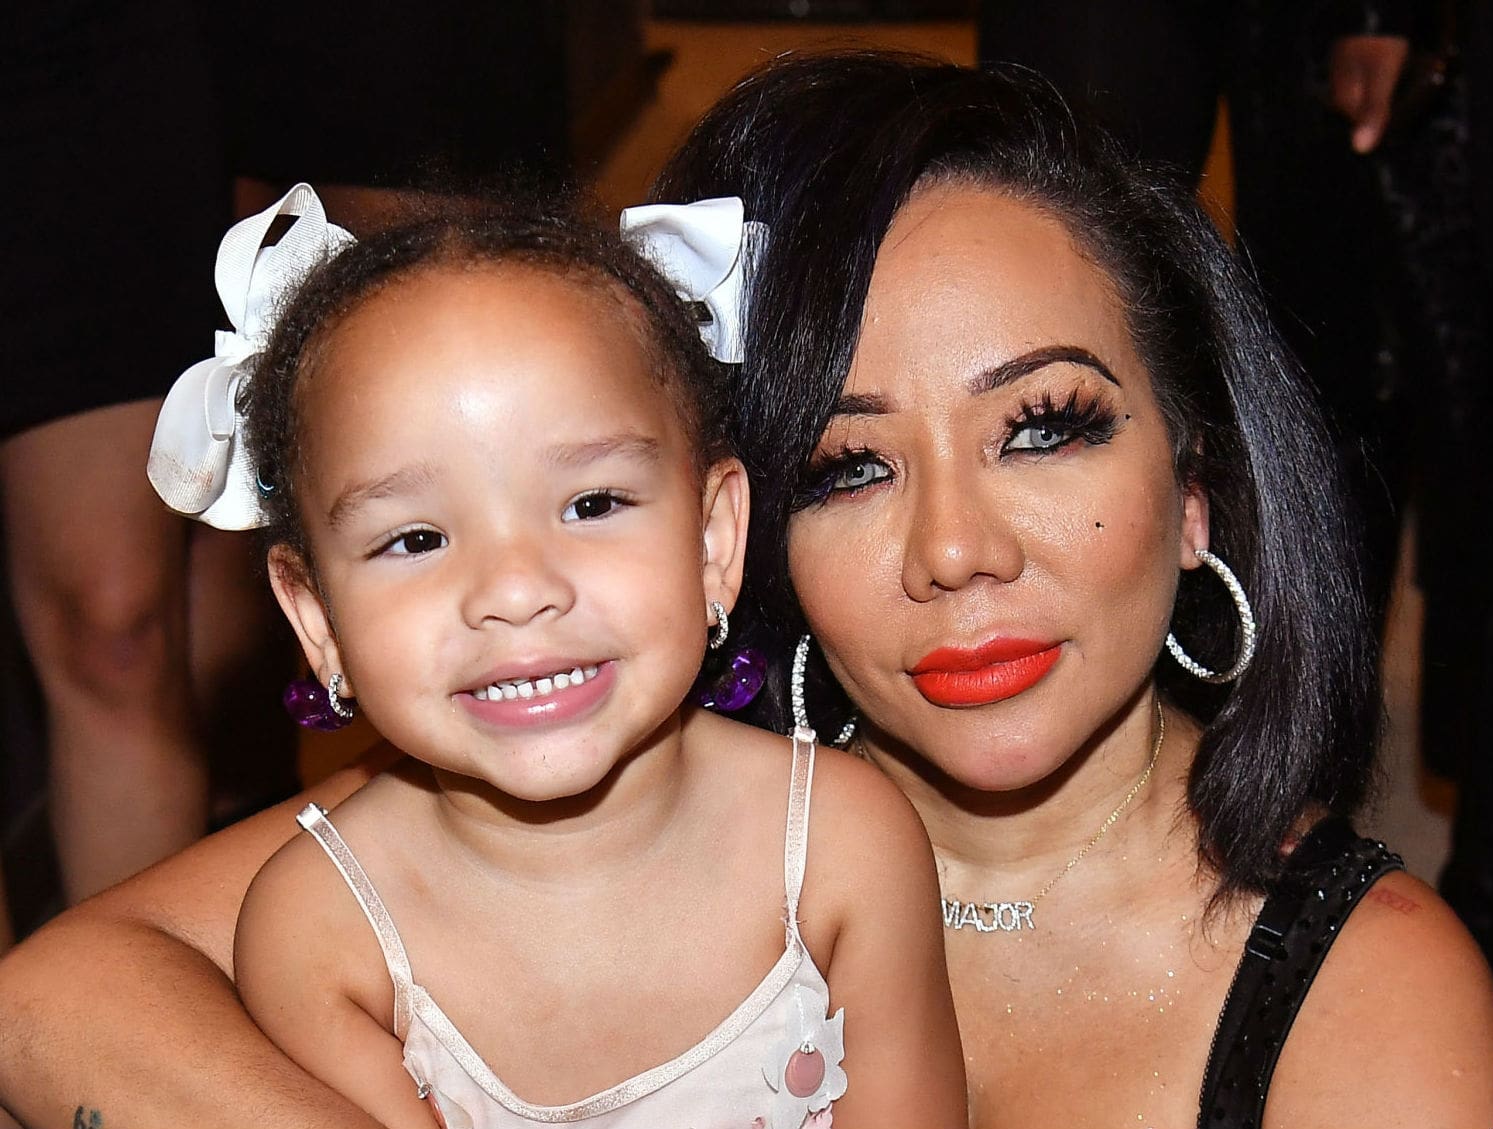 ”tiny-harris-continues-to-publicly-praise-heiress-harris-see-the-latest-video-that-she-shared-on-ig”